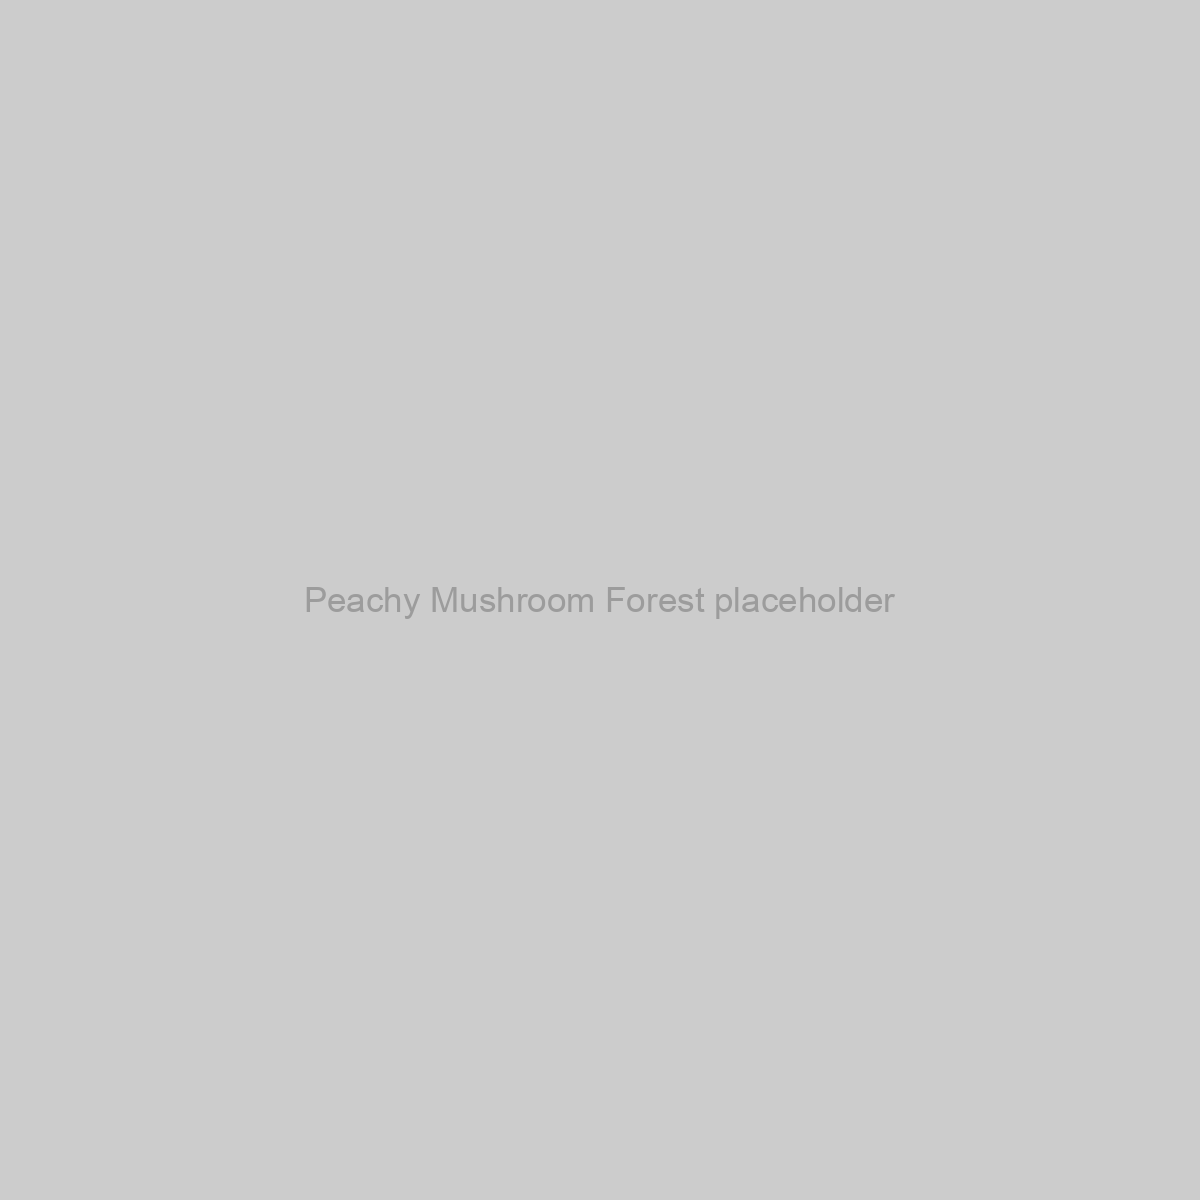 Peachy Mushroom Forest Placeholder Image